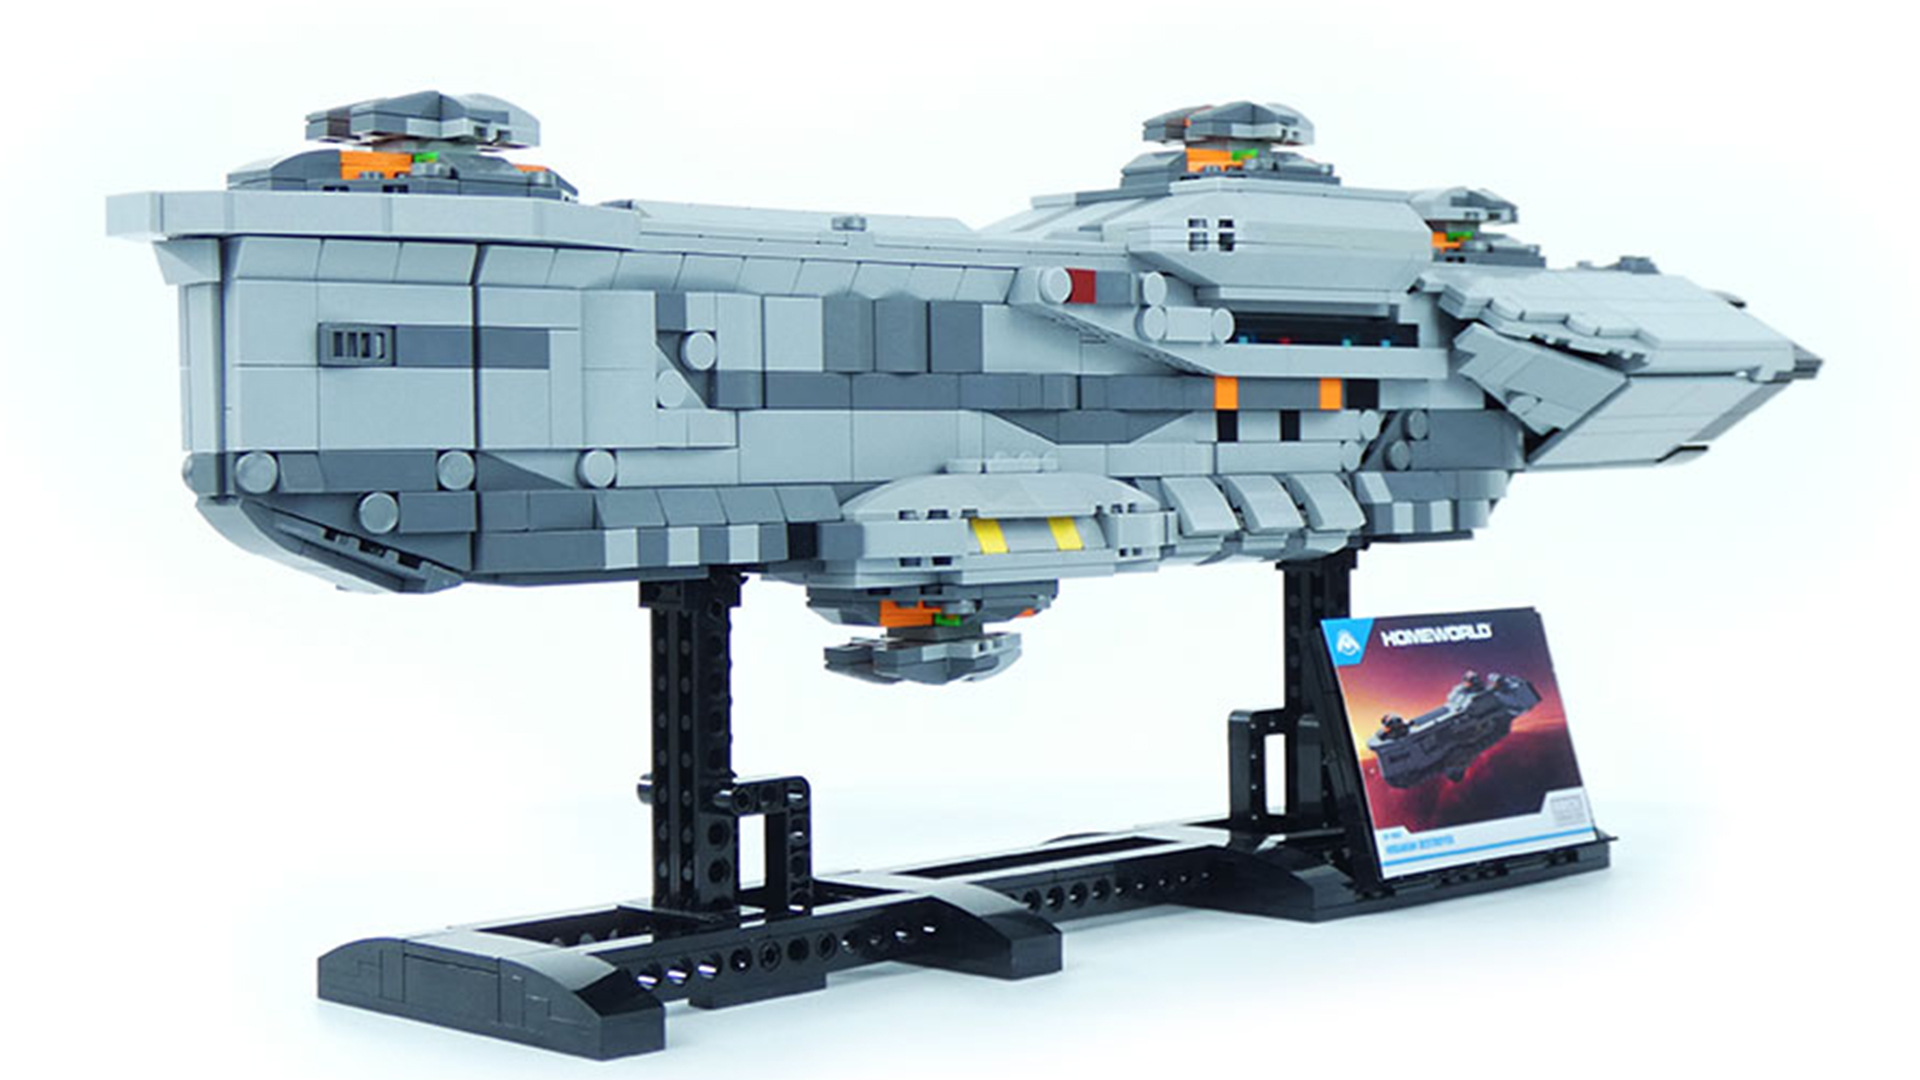 These Homeworld Lego sets are and extremely expensive